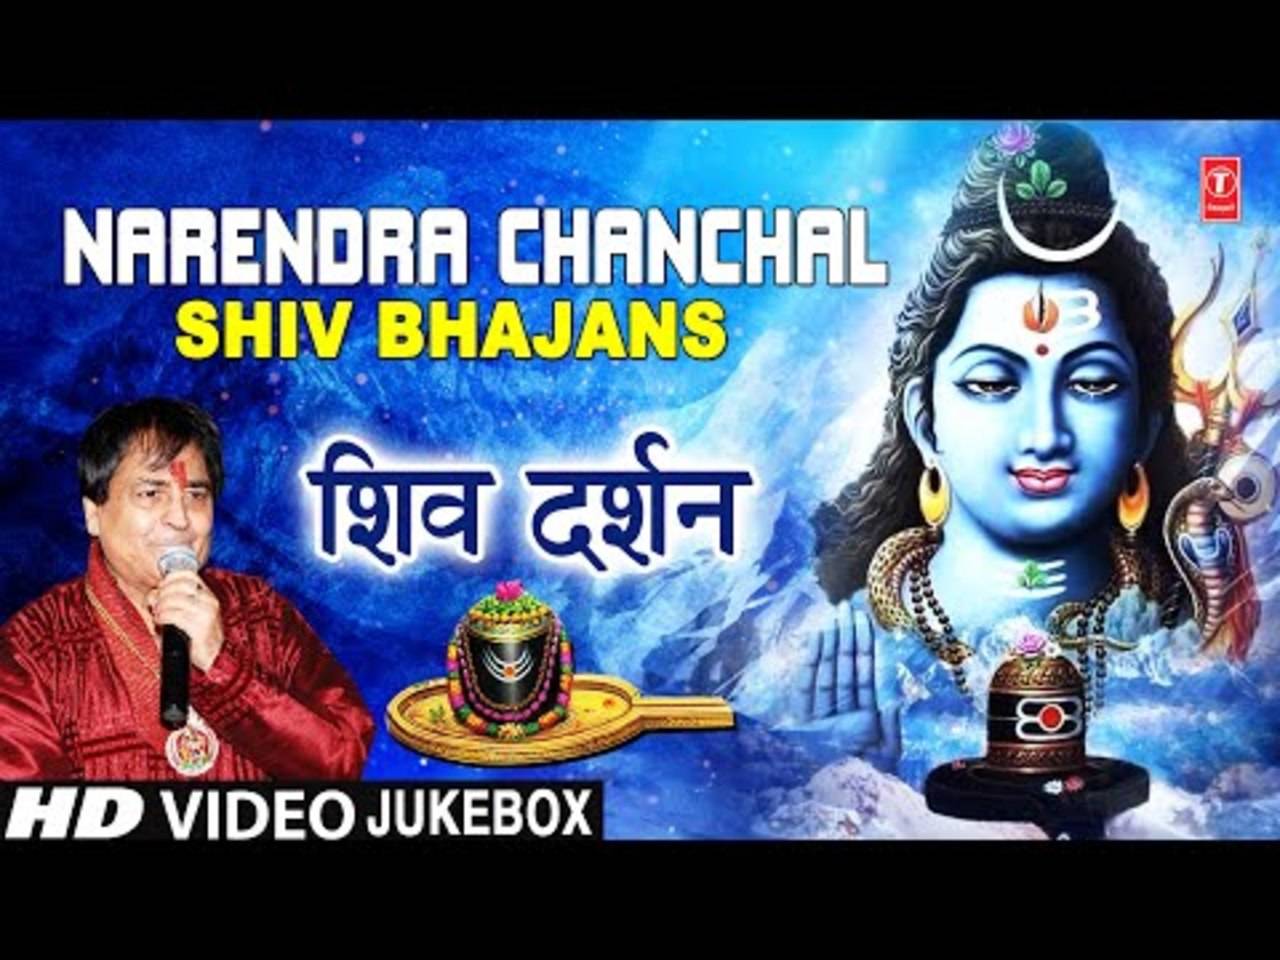 Hindi Bhakti Song 'Best Shiv Bhajans' (Audio Jukebox) Sung By Narendra  Chanchal | Lifestyle - Times of India Videos